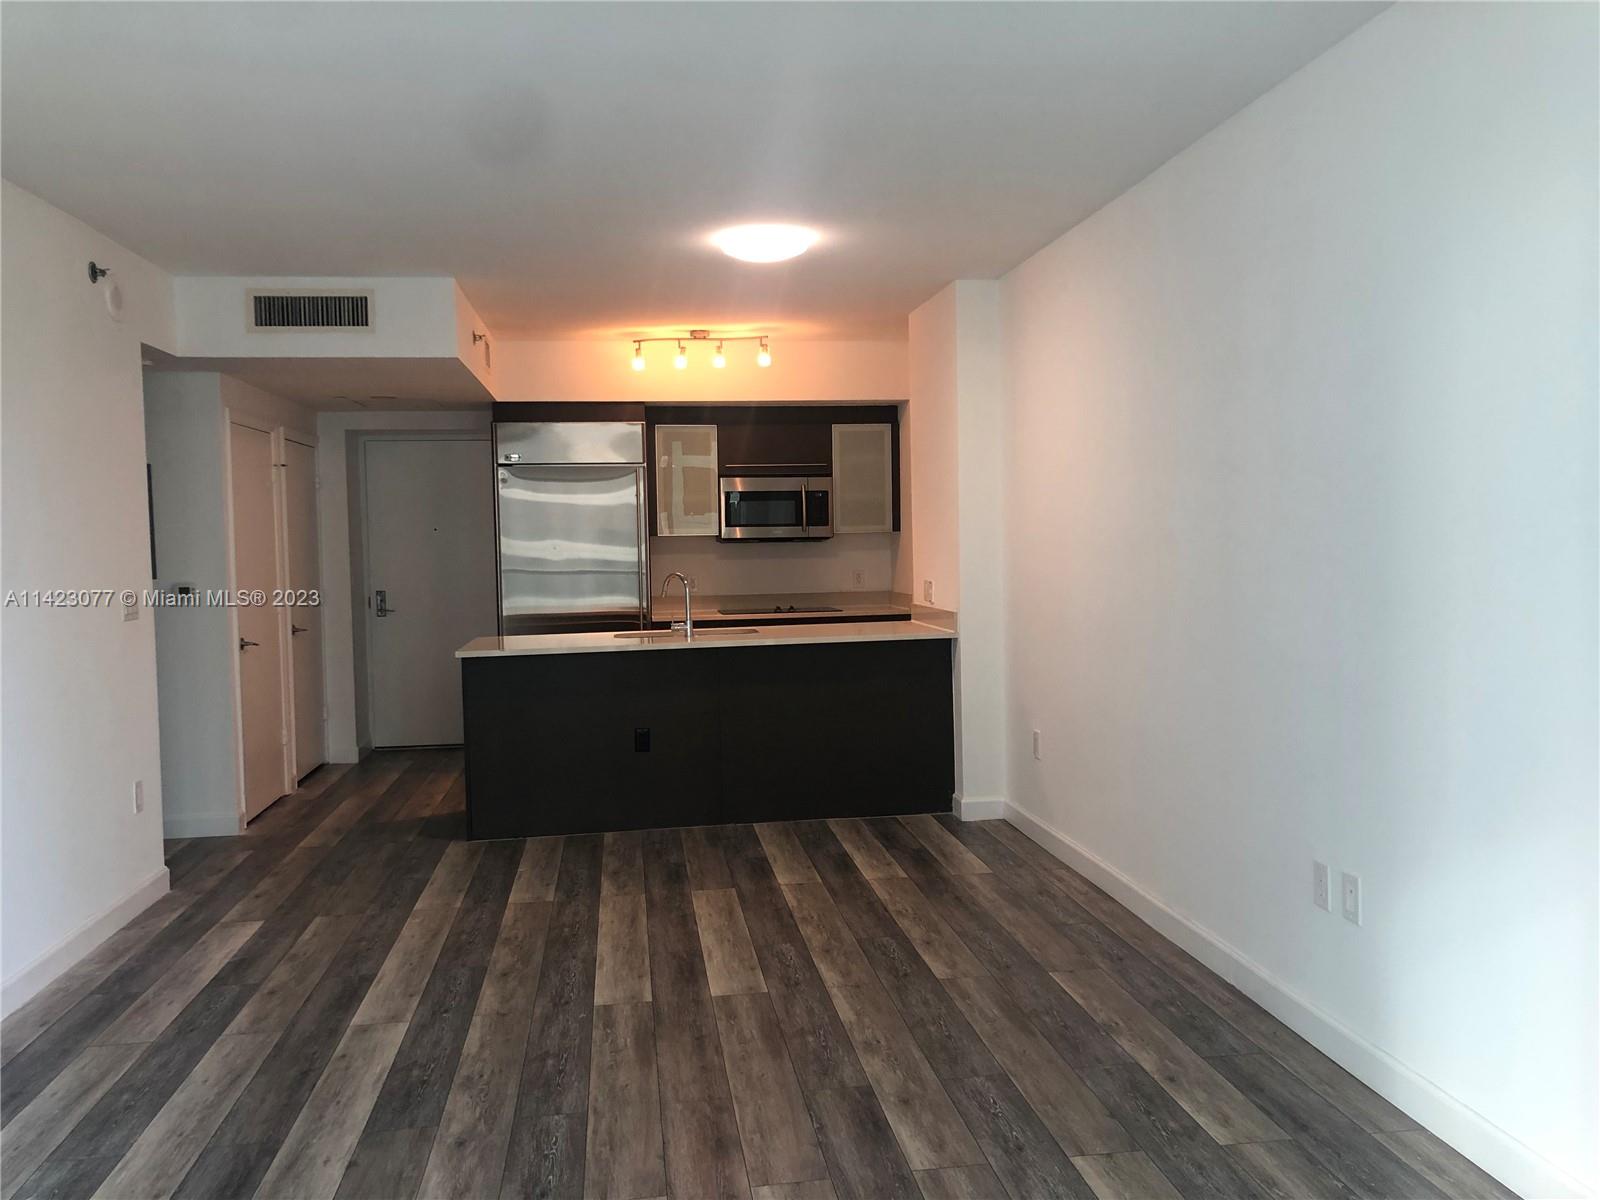 Perfect 1bed 1bath located in the heart of the Financial District. Building amenities include: theater room, sunset
room, gym, business center, his/her spa and more.